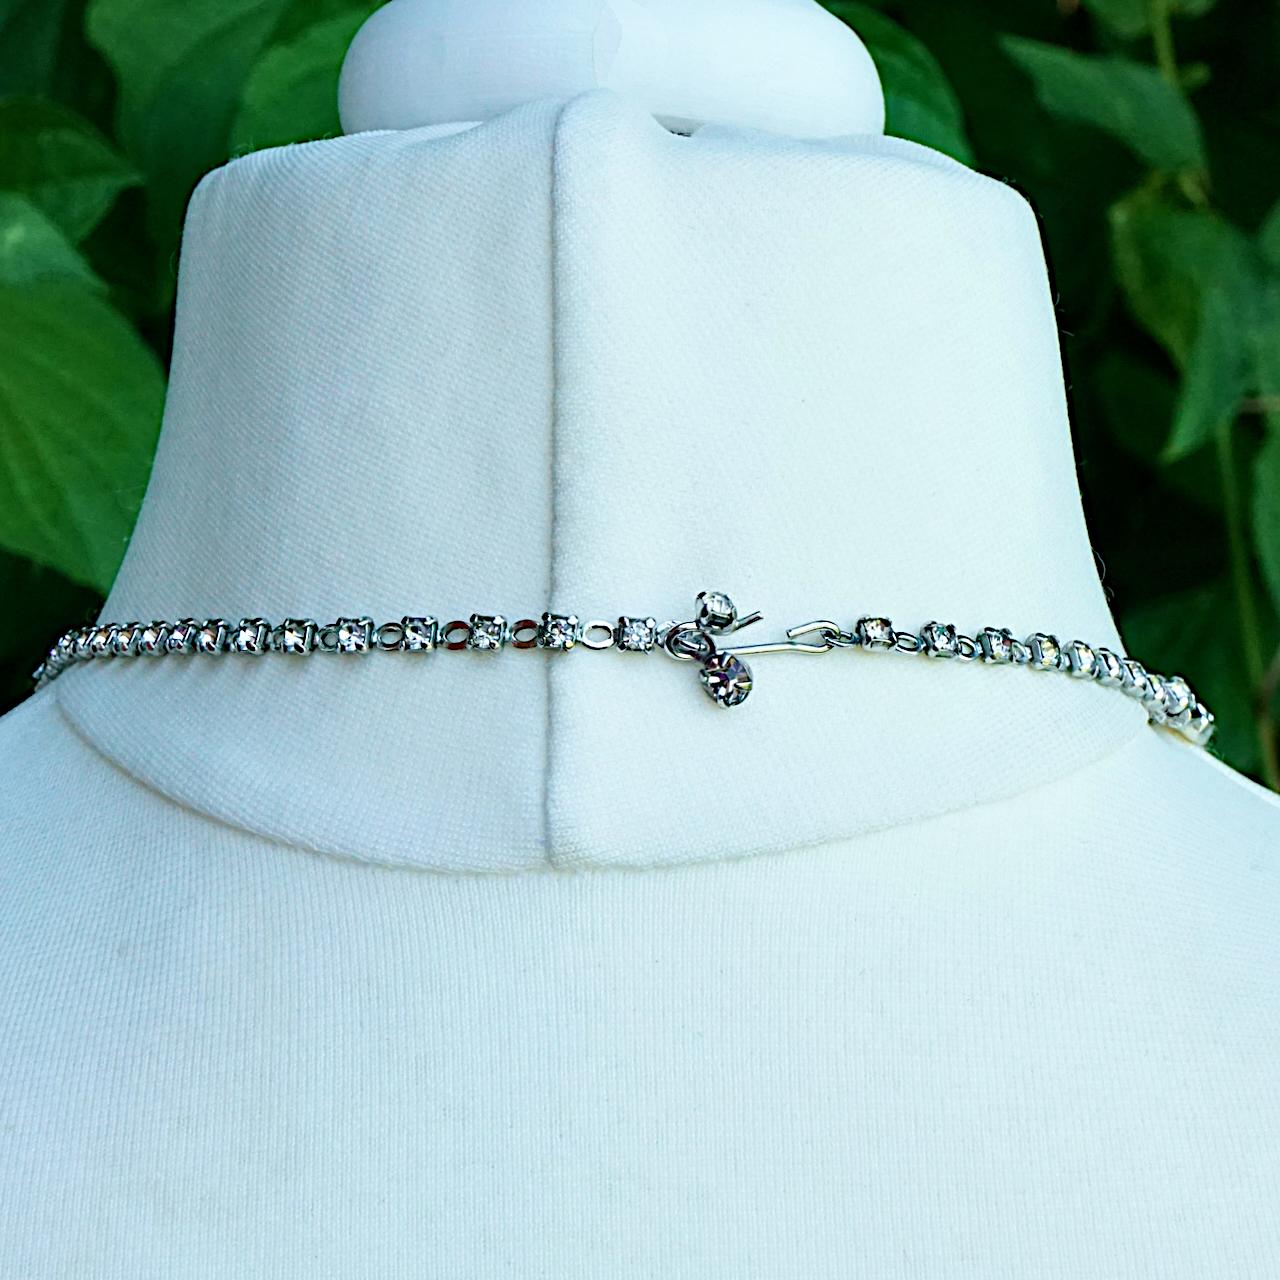 Women's or Men's Silver Plated Bar Link Rhinestone Necklace circa 1950s For Sale